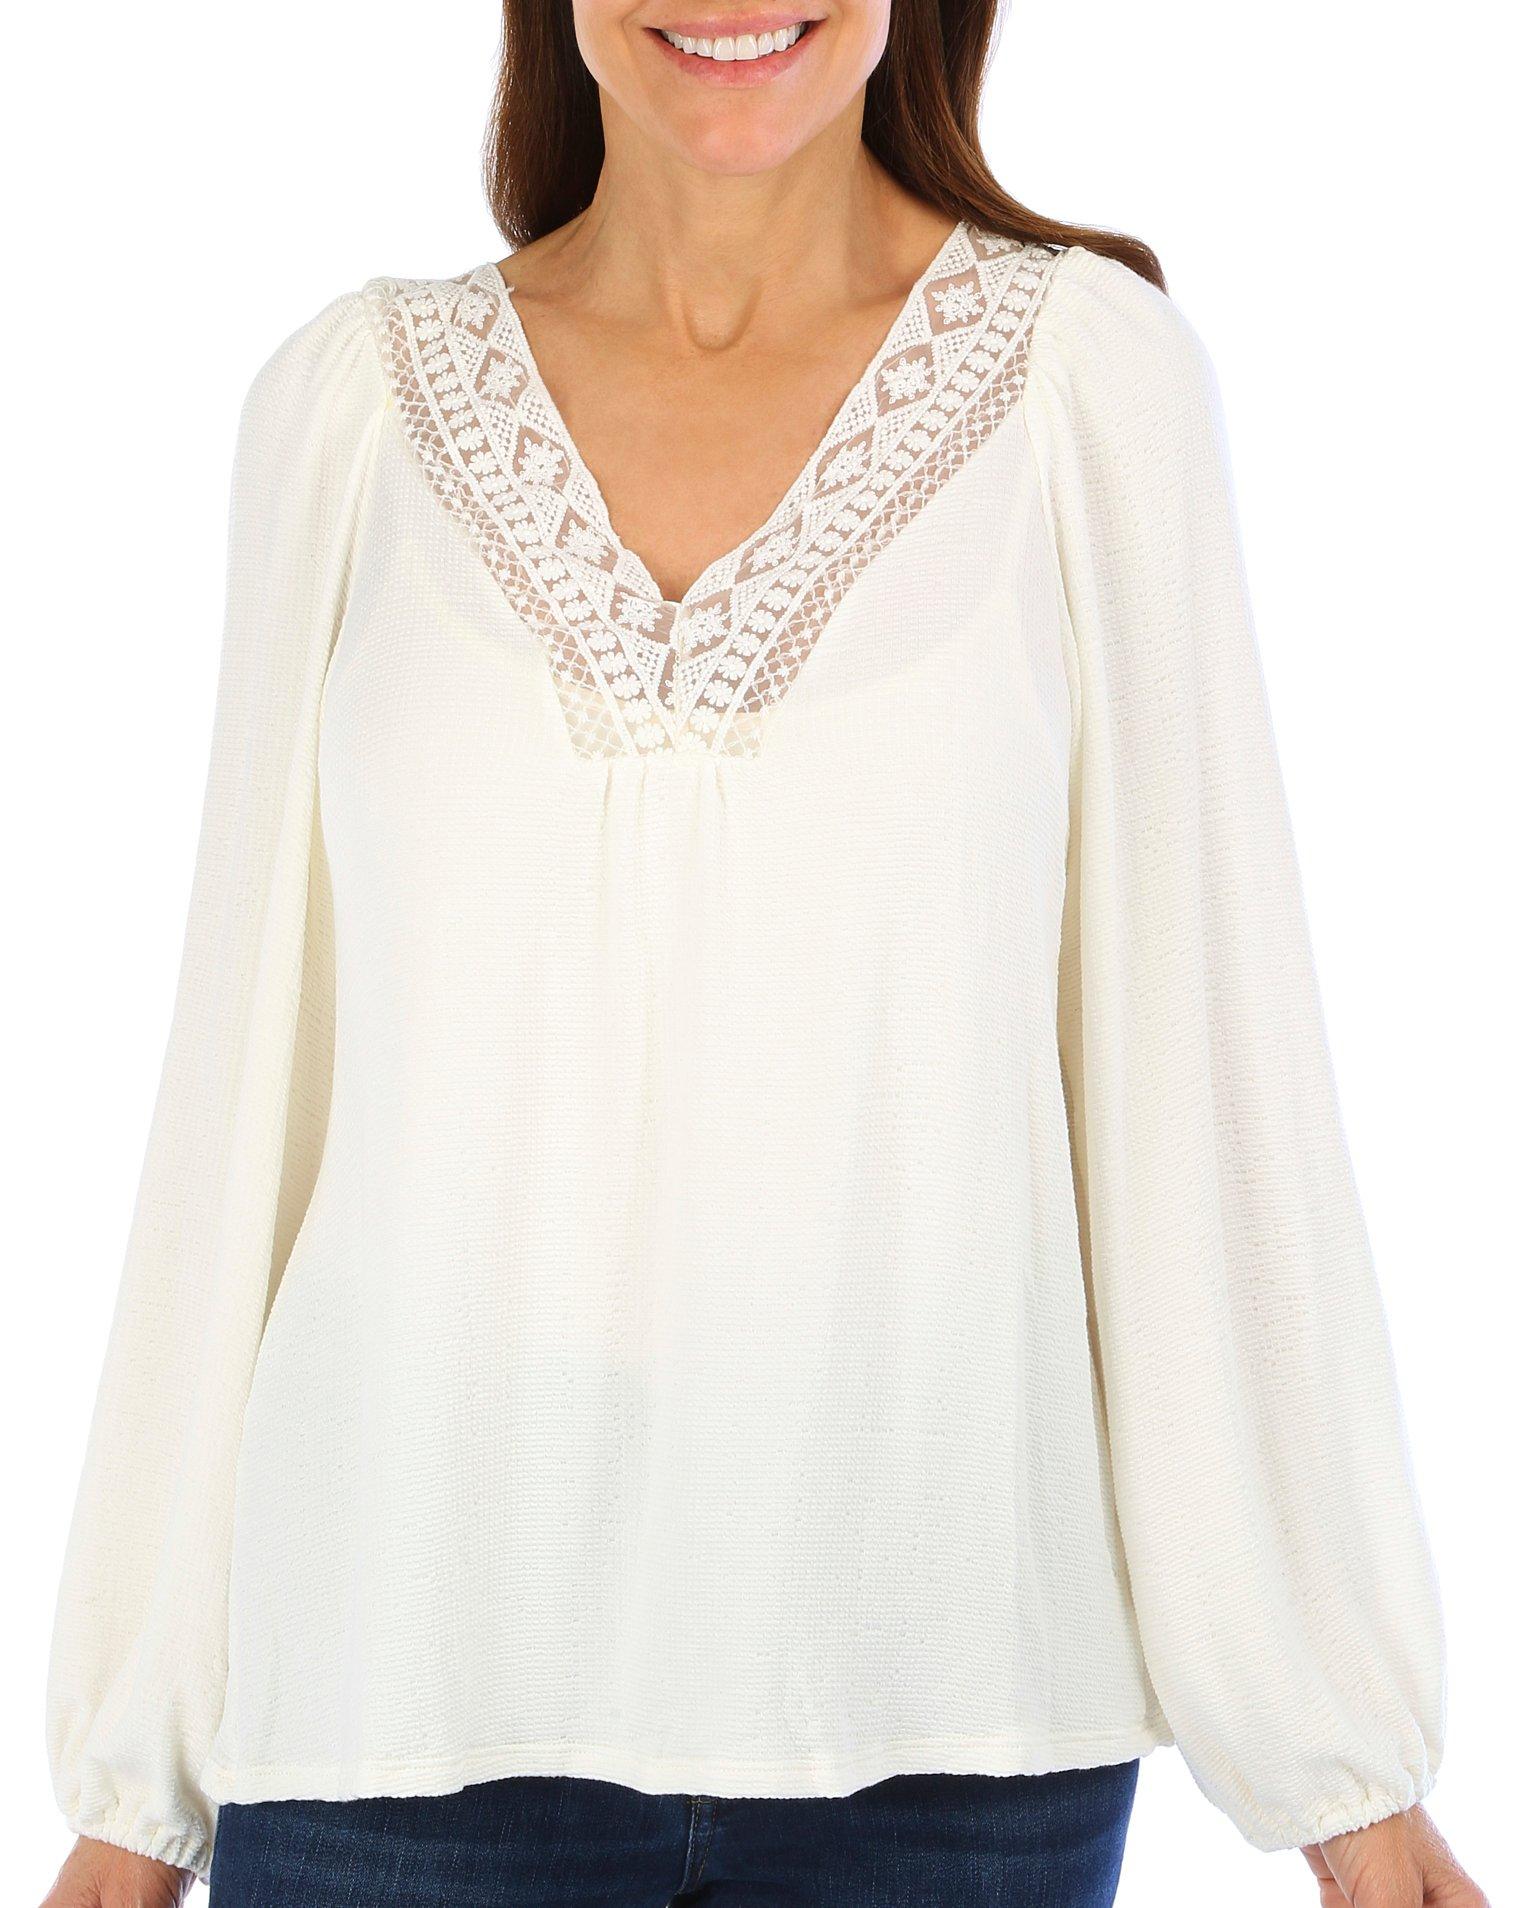 Above and Beyond Womens Lace Trimmed V-Neck Long